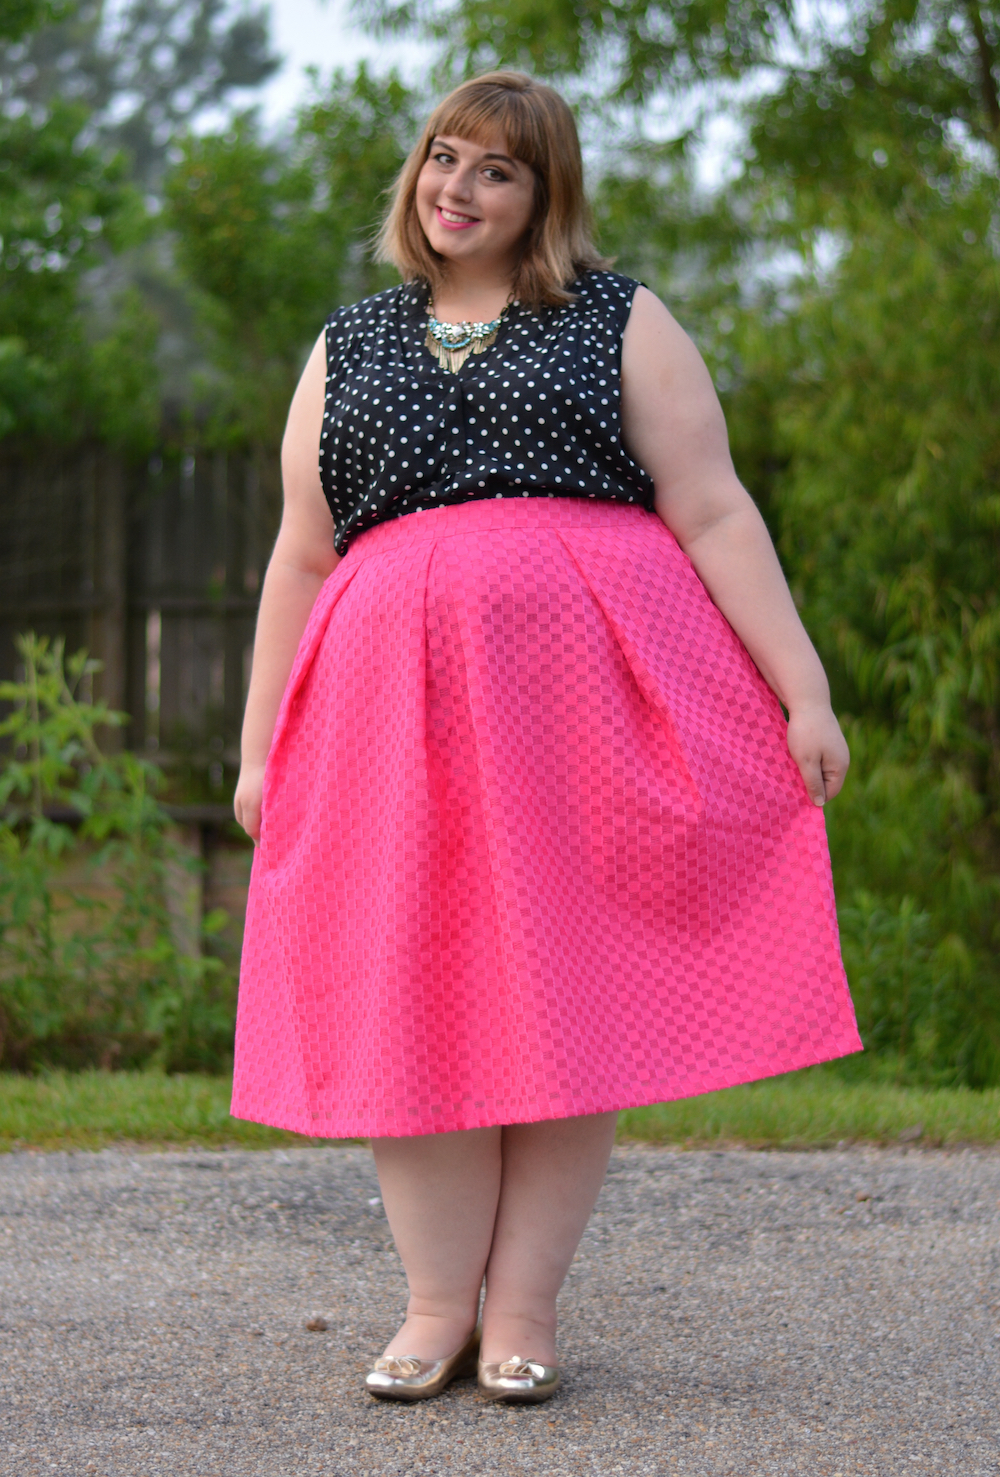 Sans Scrubs: August Fashionable Feature: Becca from Super Style Me